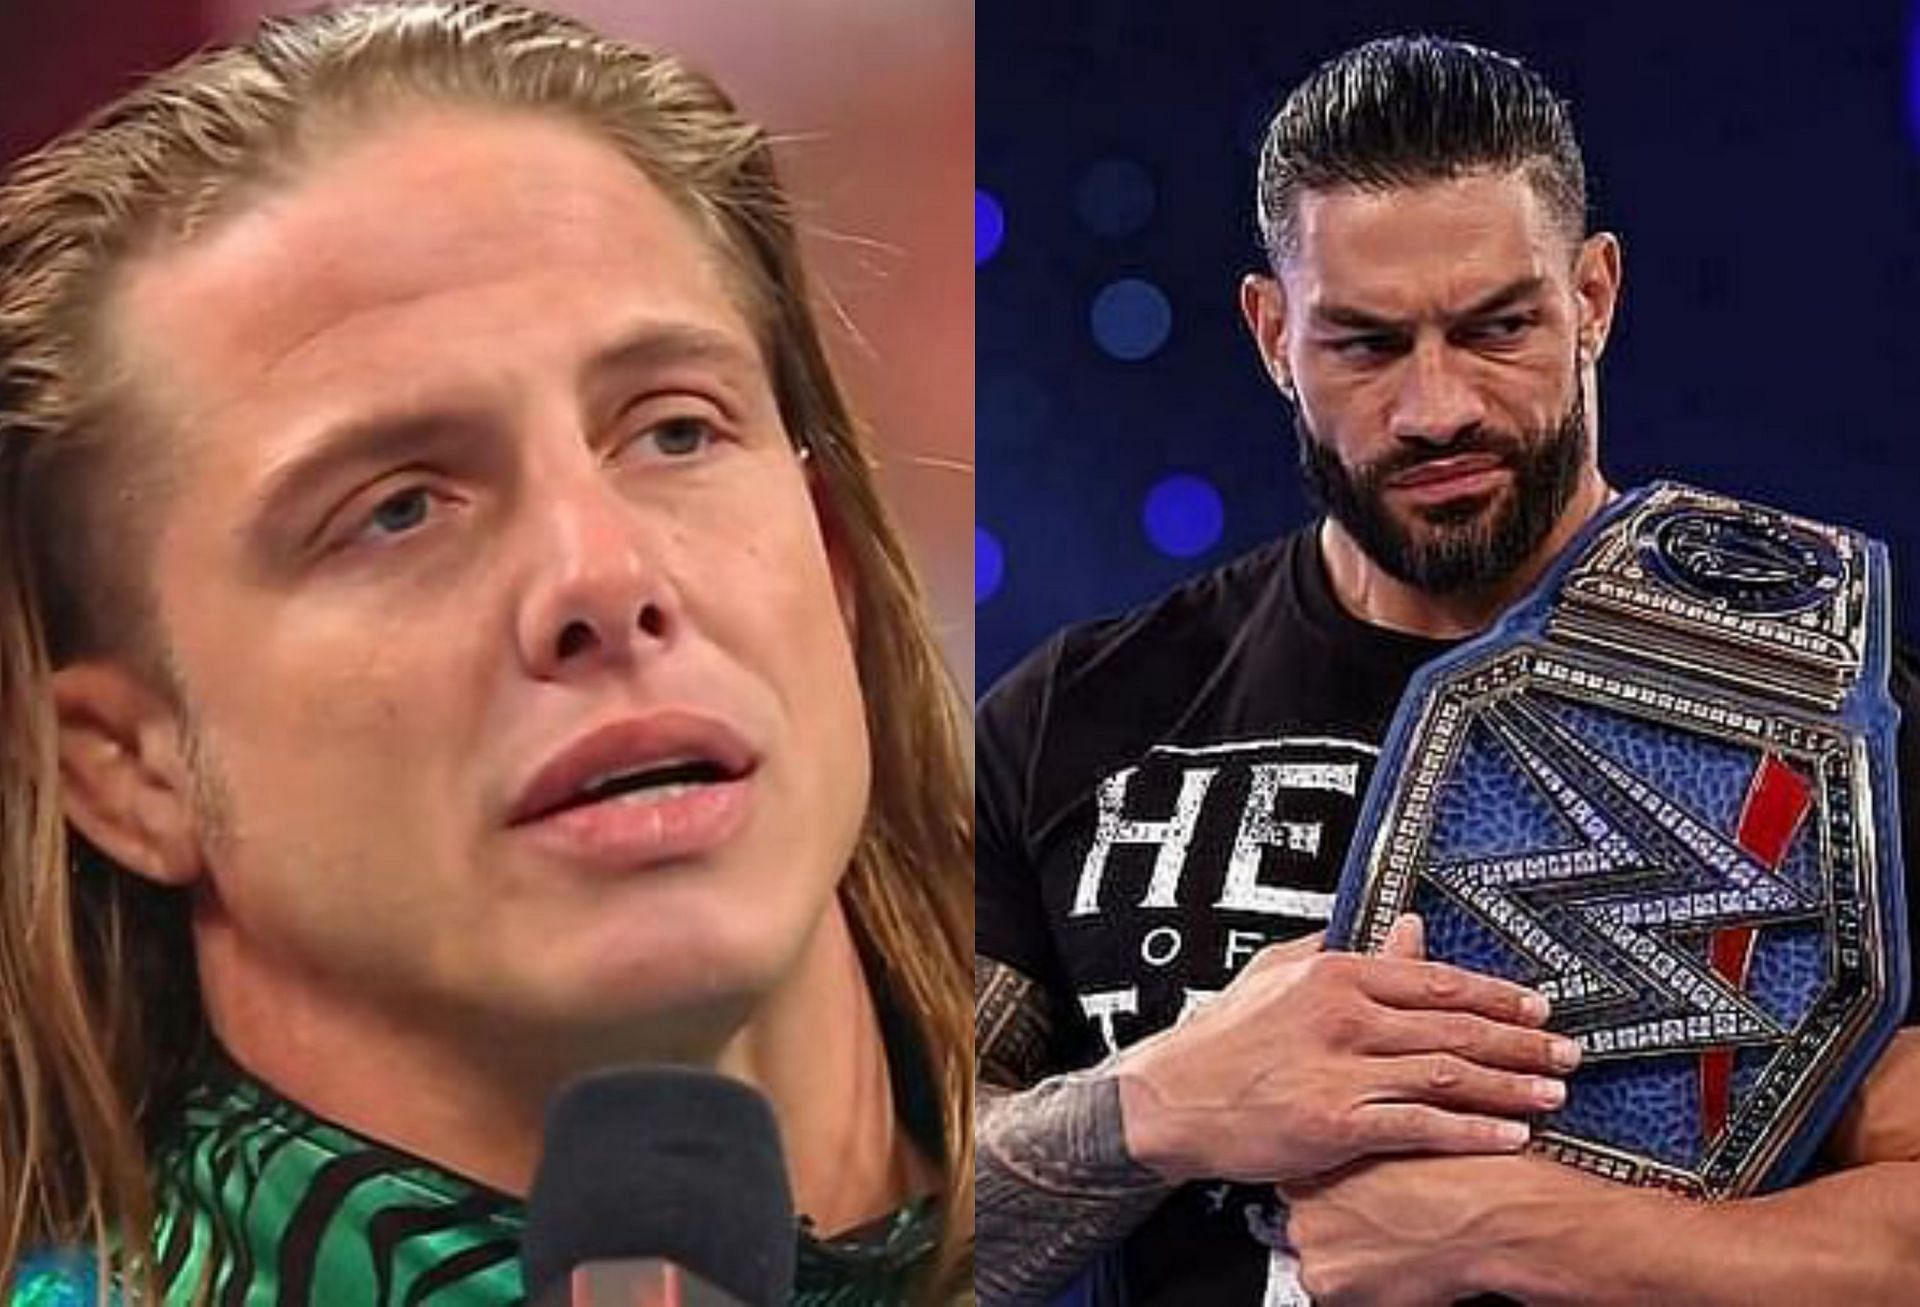 Roman Reigns and Riddle could have another showdown on the upcoming episode of RAW.